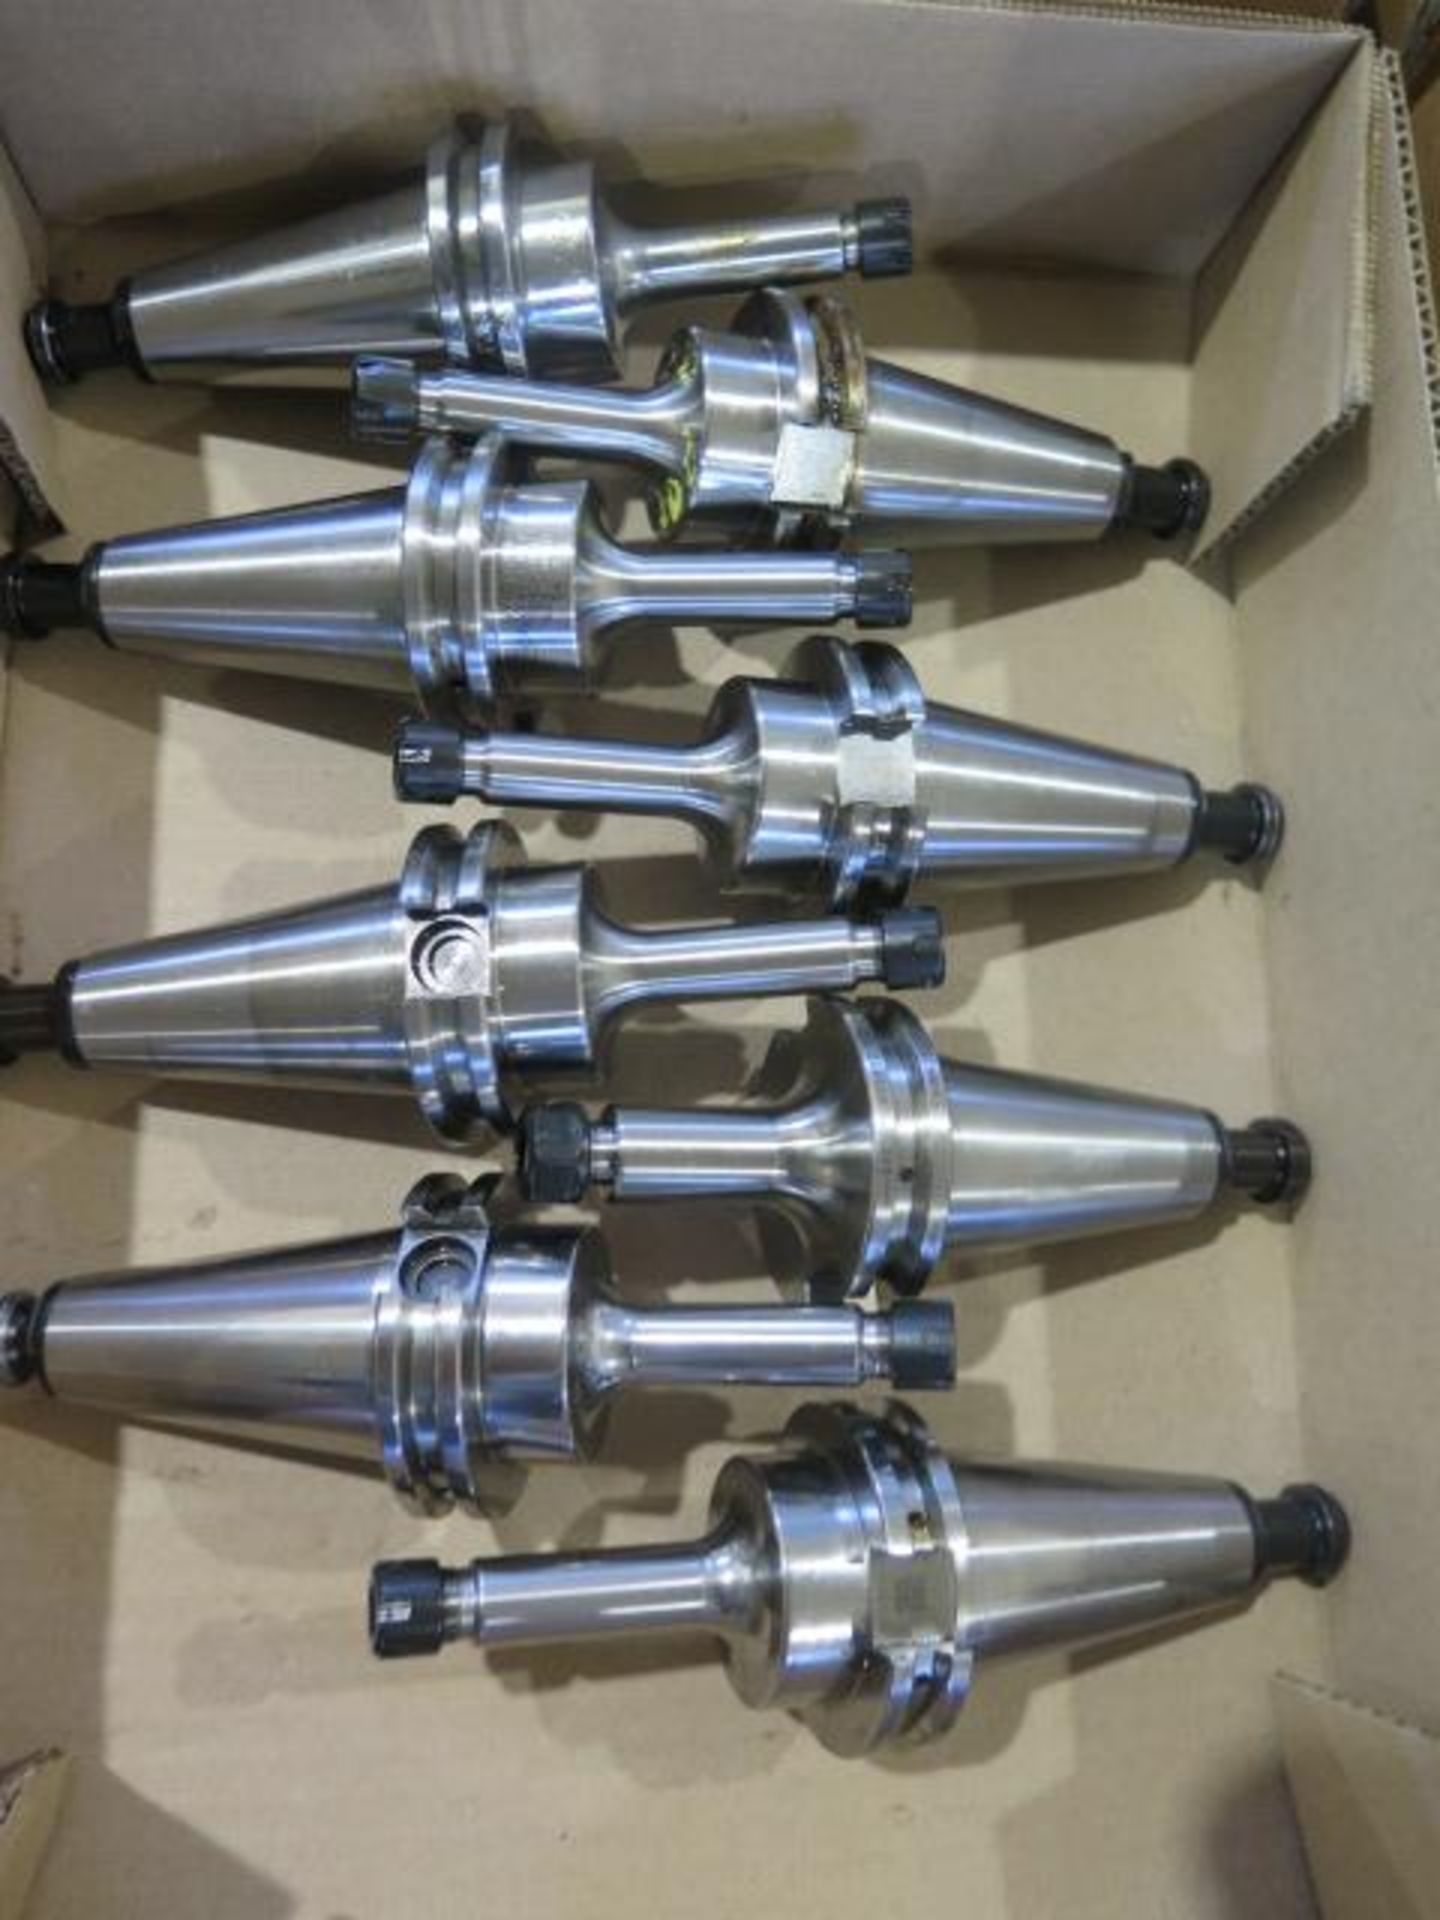 CAT-40 Taper 25K Balanced ER11 2.5" Extended Length Collet Chucks (8) (SOLD AS-IS - NO WARRANTY) - Image 2 of 4